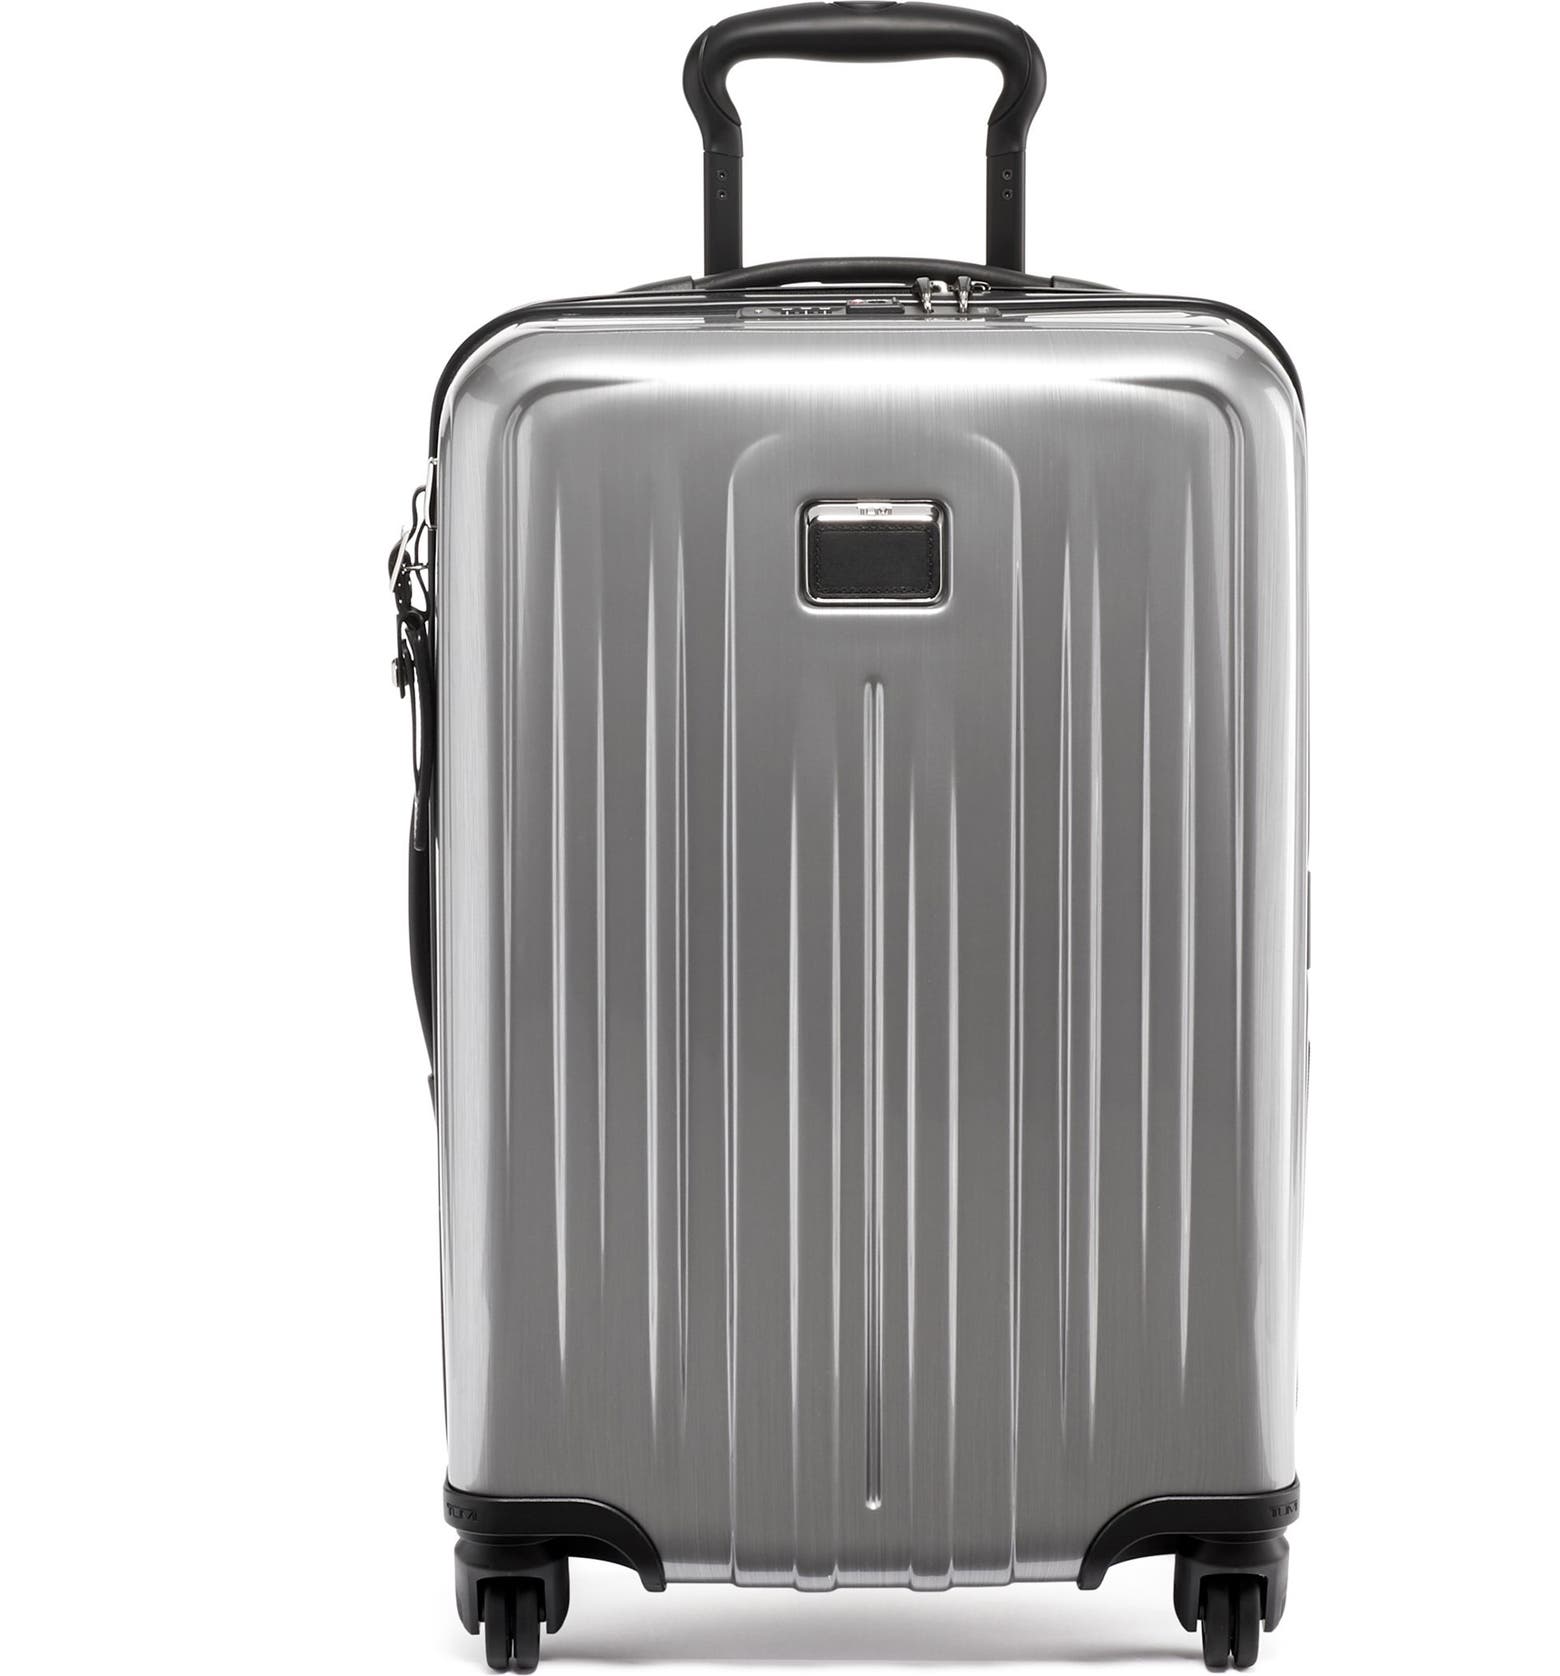 V4 International 22-Inch Expandable Wheeled Carry-On by Tumi